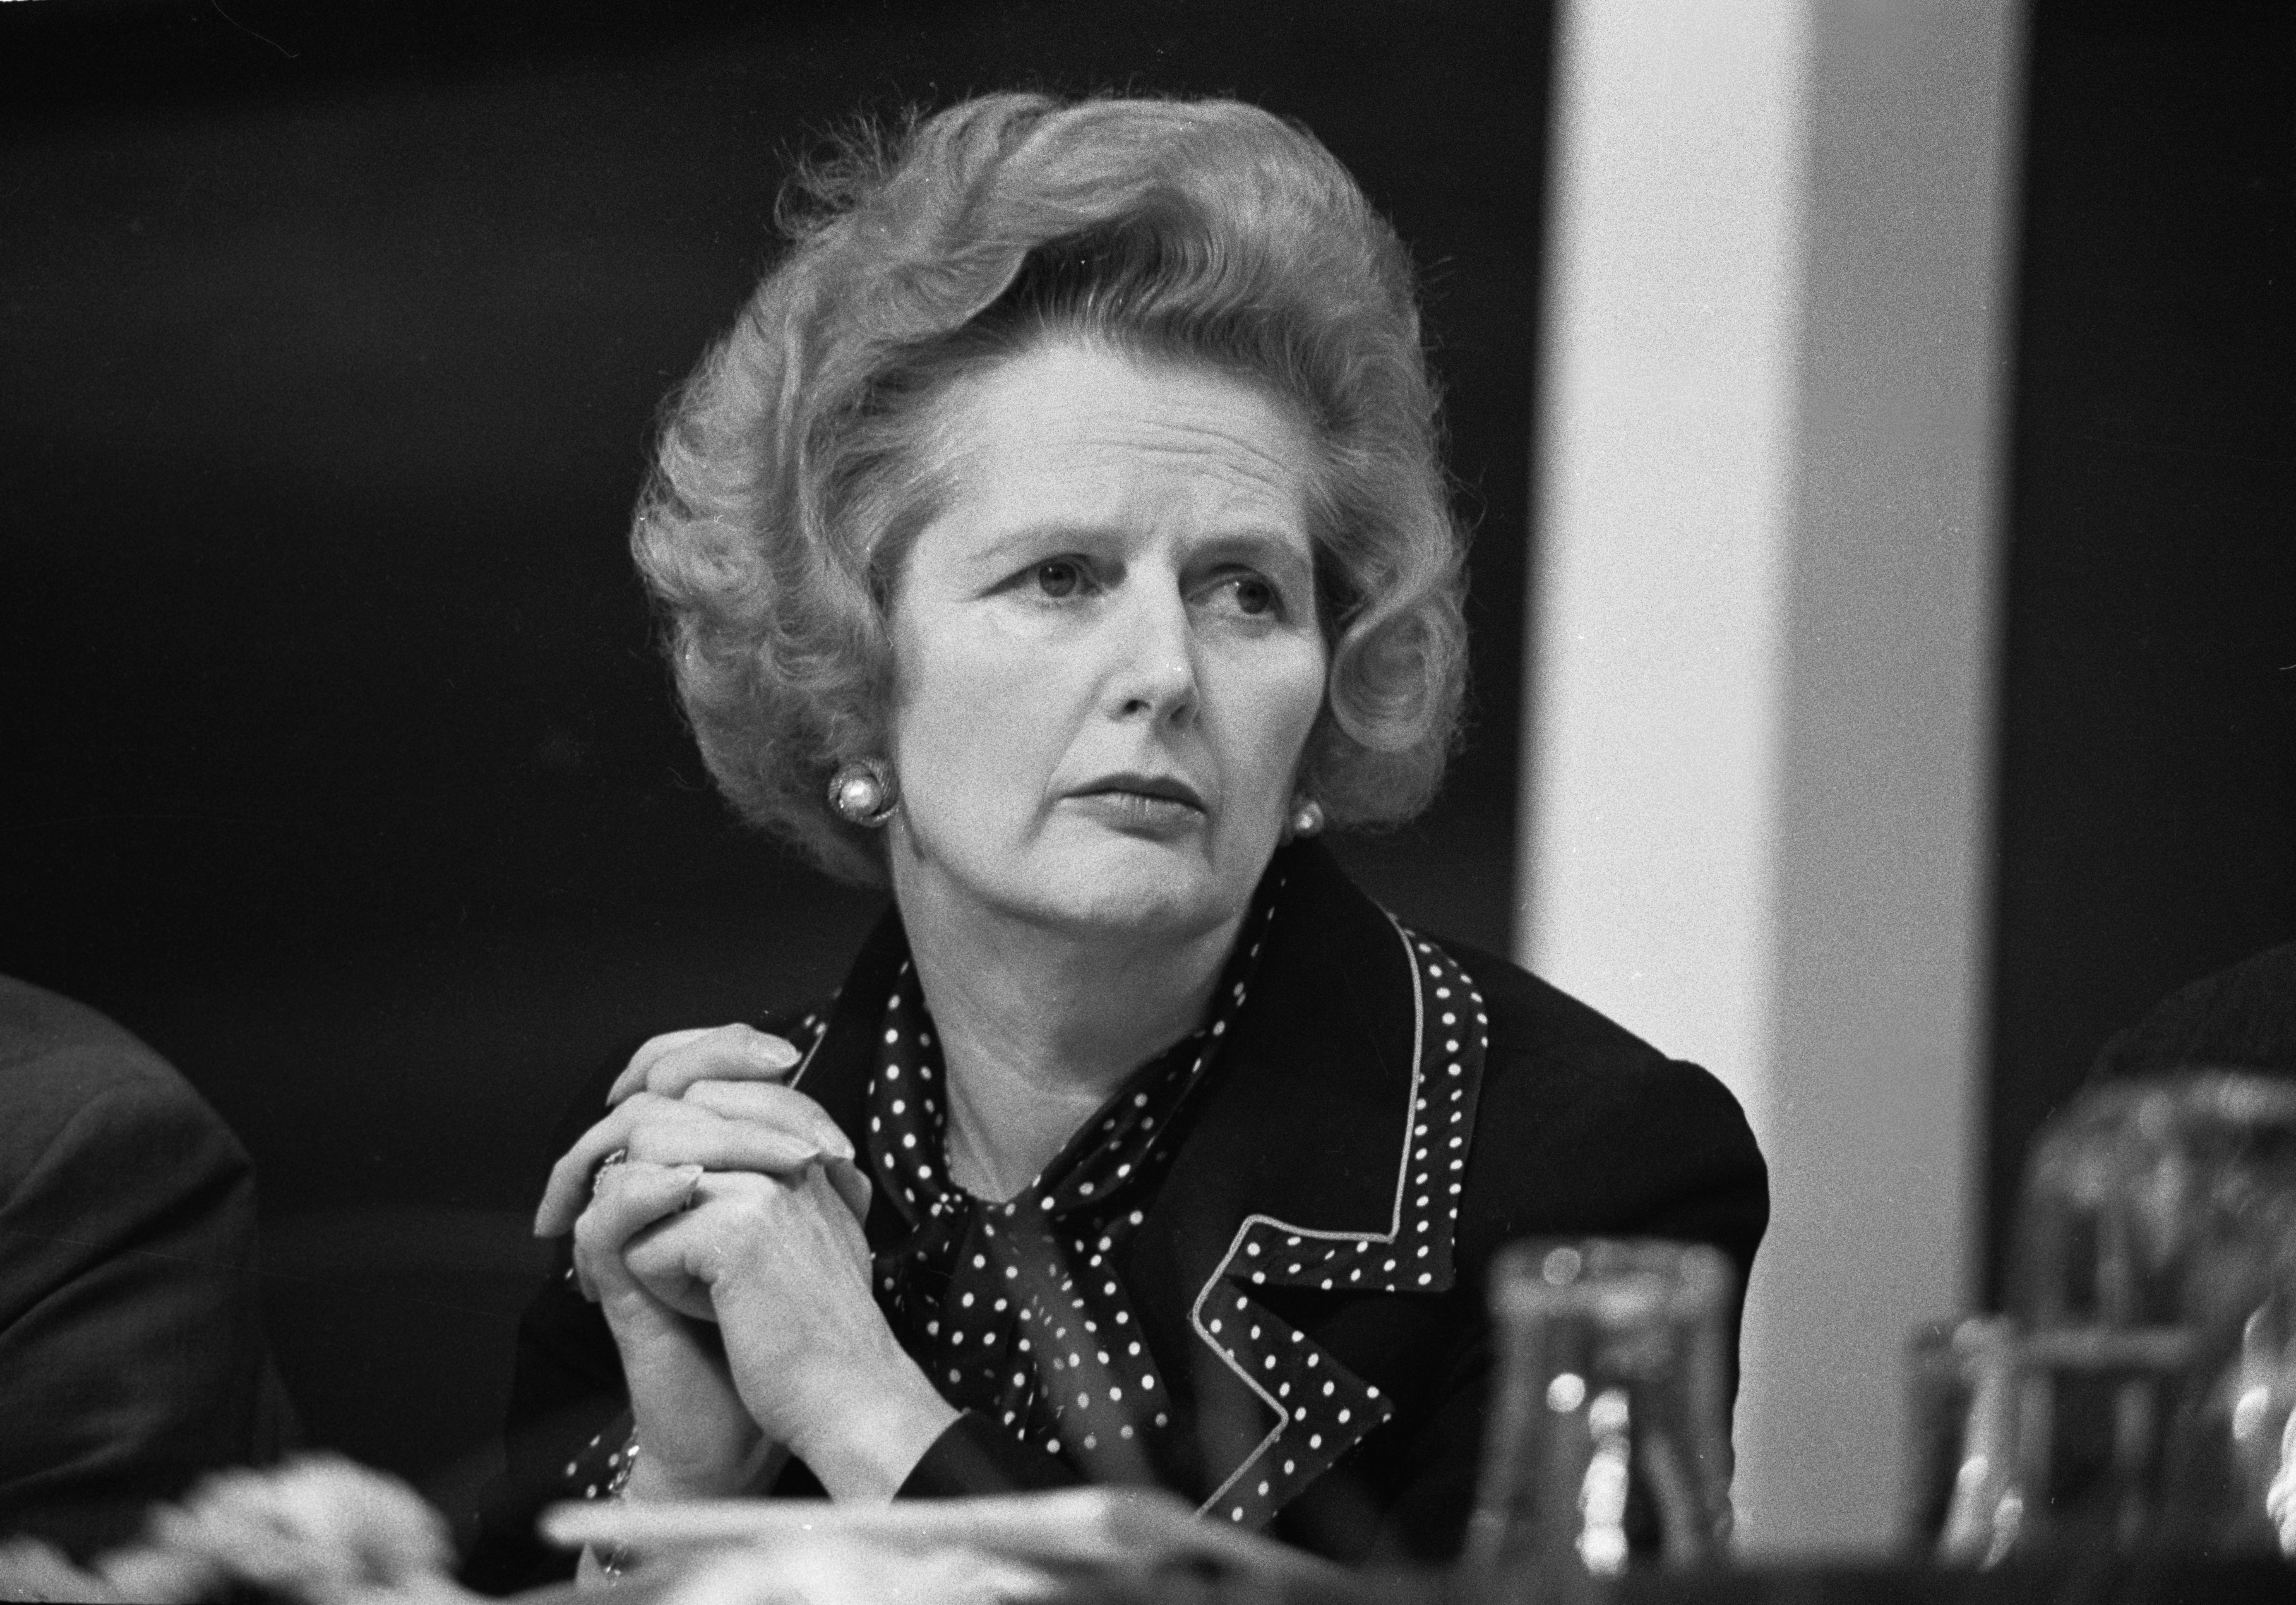 Working-class Estuarial Tories put Margaret Thatcher in Downing Street, and kept her there for 10 long years